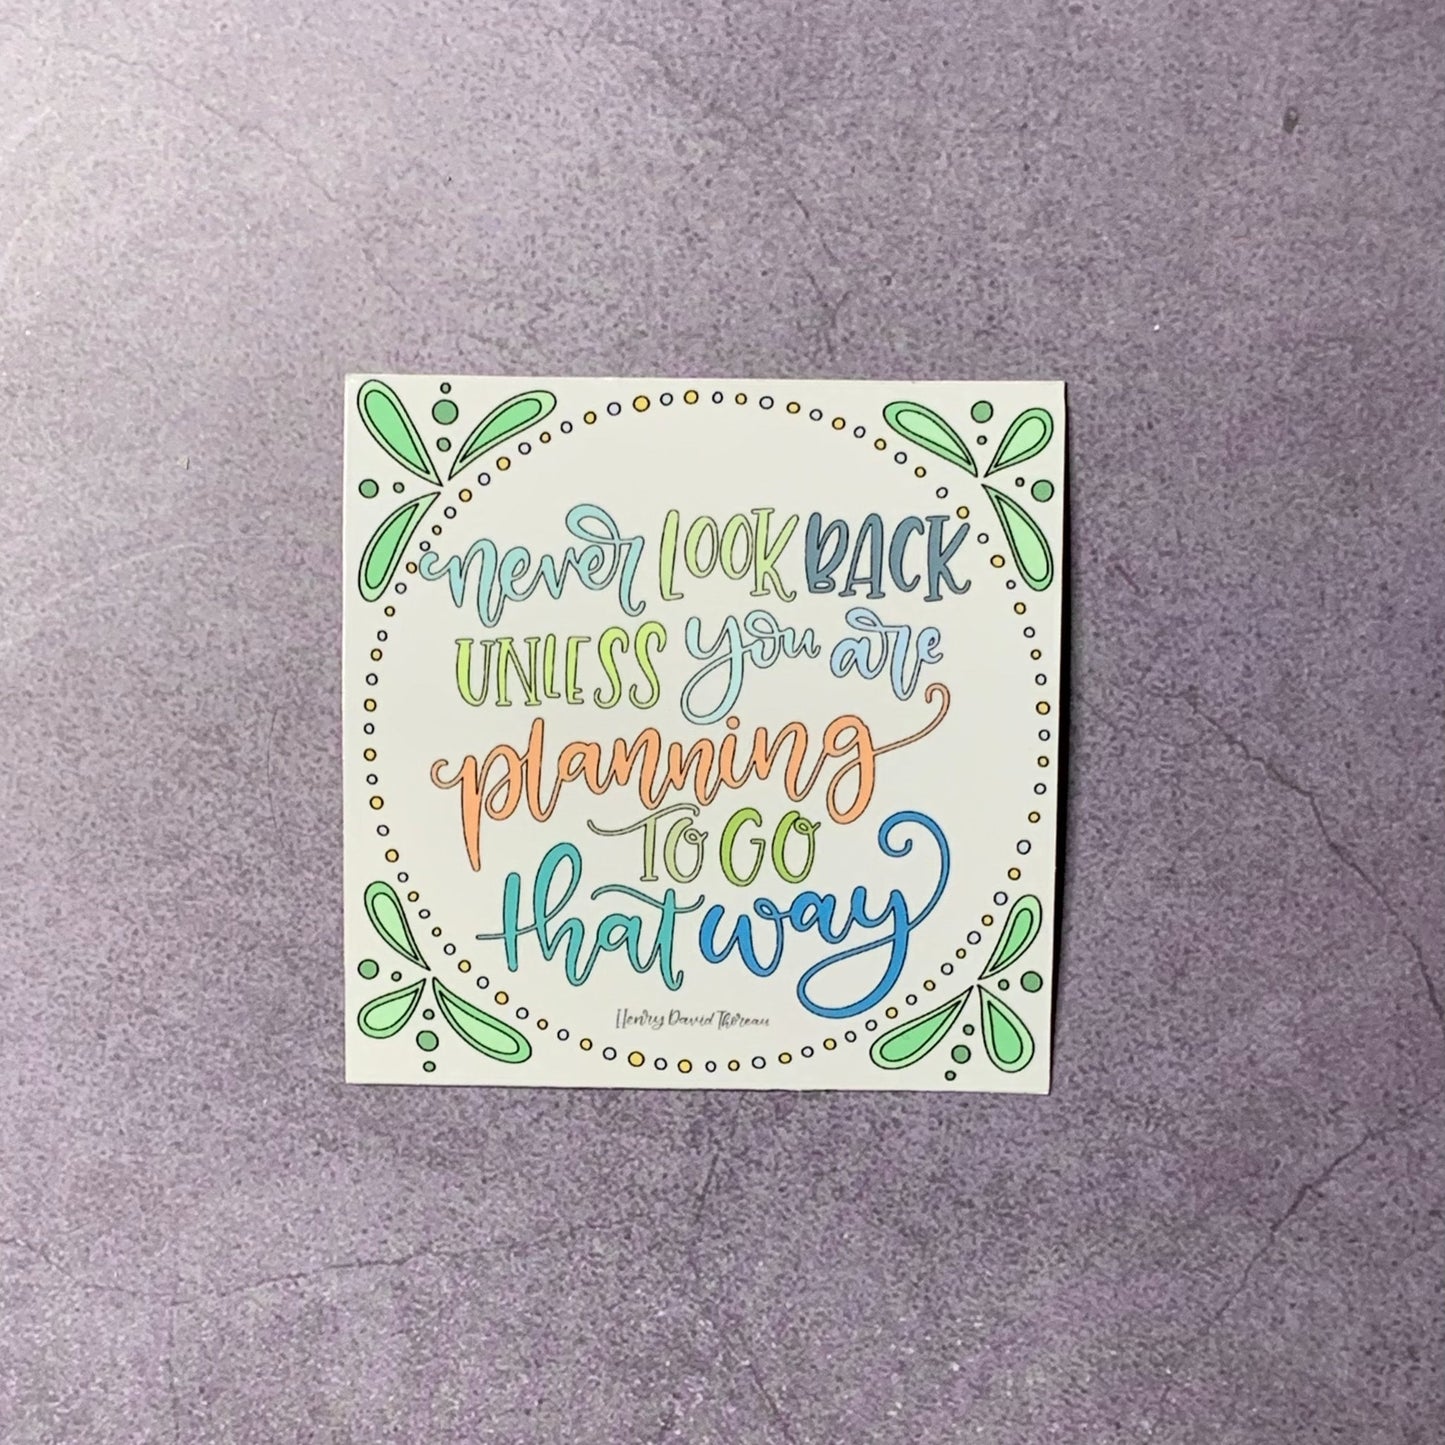 Never Look Back Unless You're Going That Way Vinyl Sticker